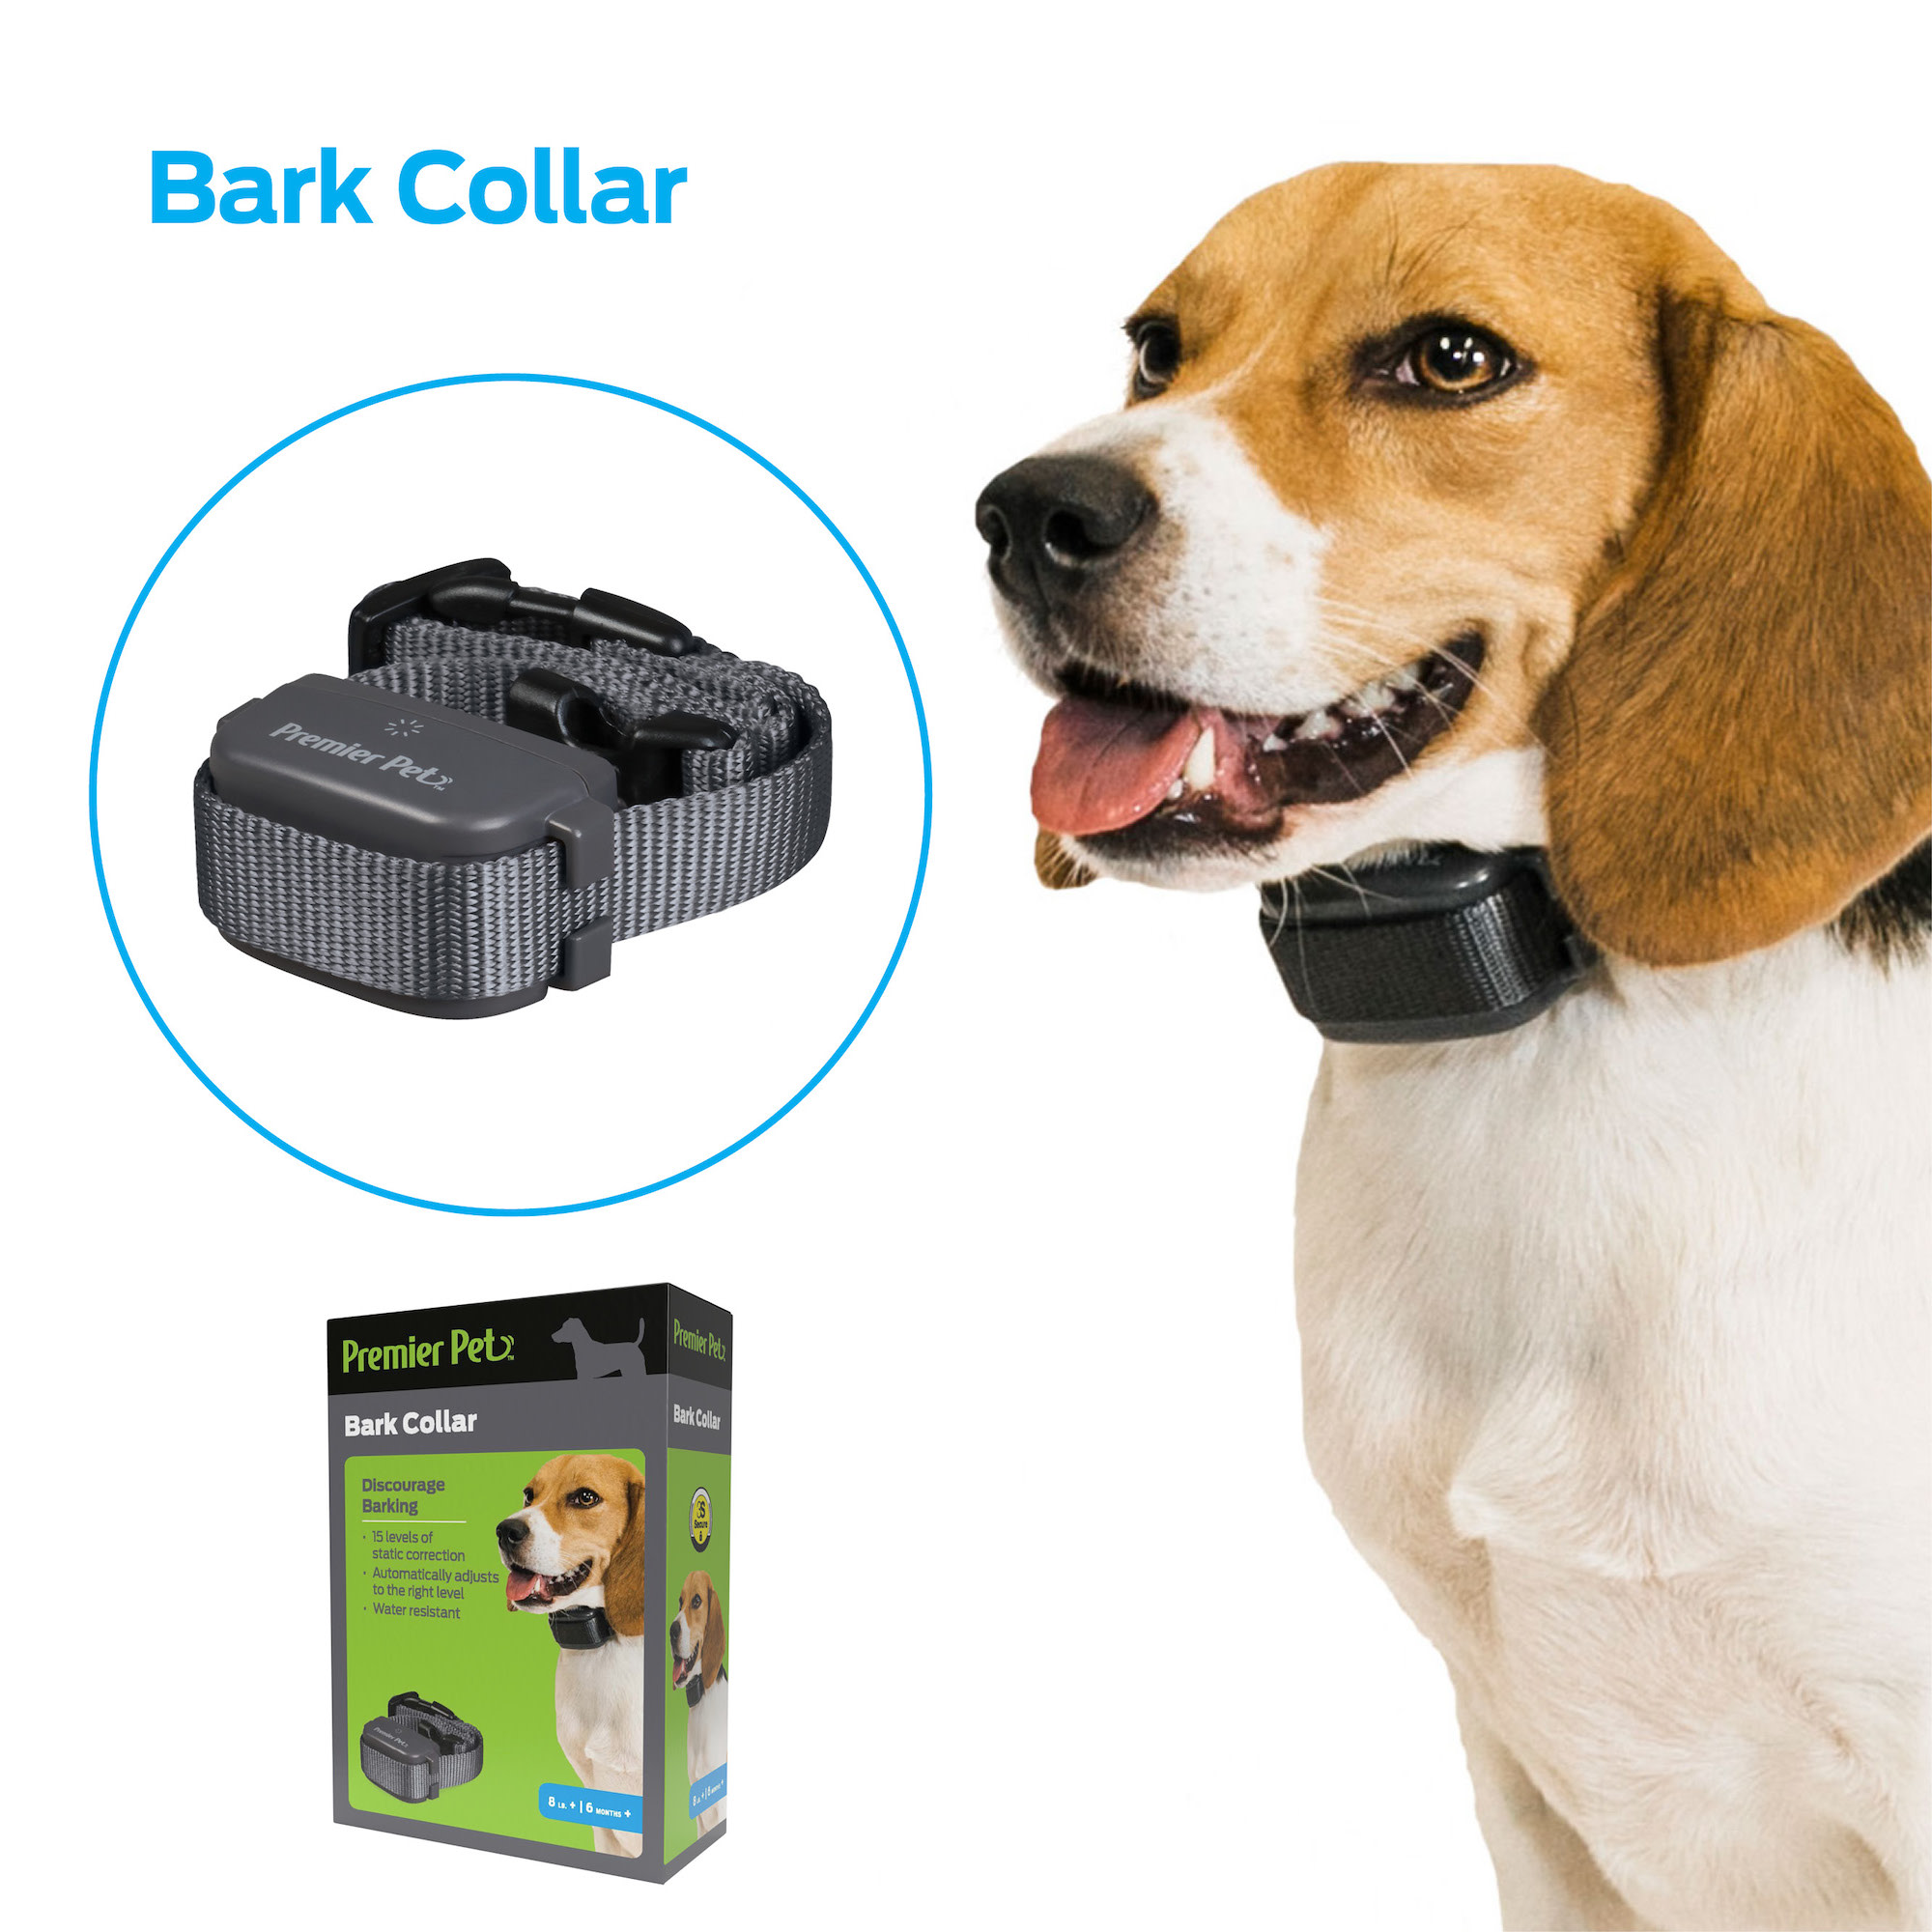 Premier Pet Bark Collar: Discourages Barking for All Size Dogs, Adjustable, Water Resistant, Gentle Static Correction, Low Battery Indicator, No Programming Required - image 1 of 14